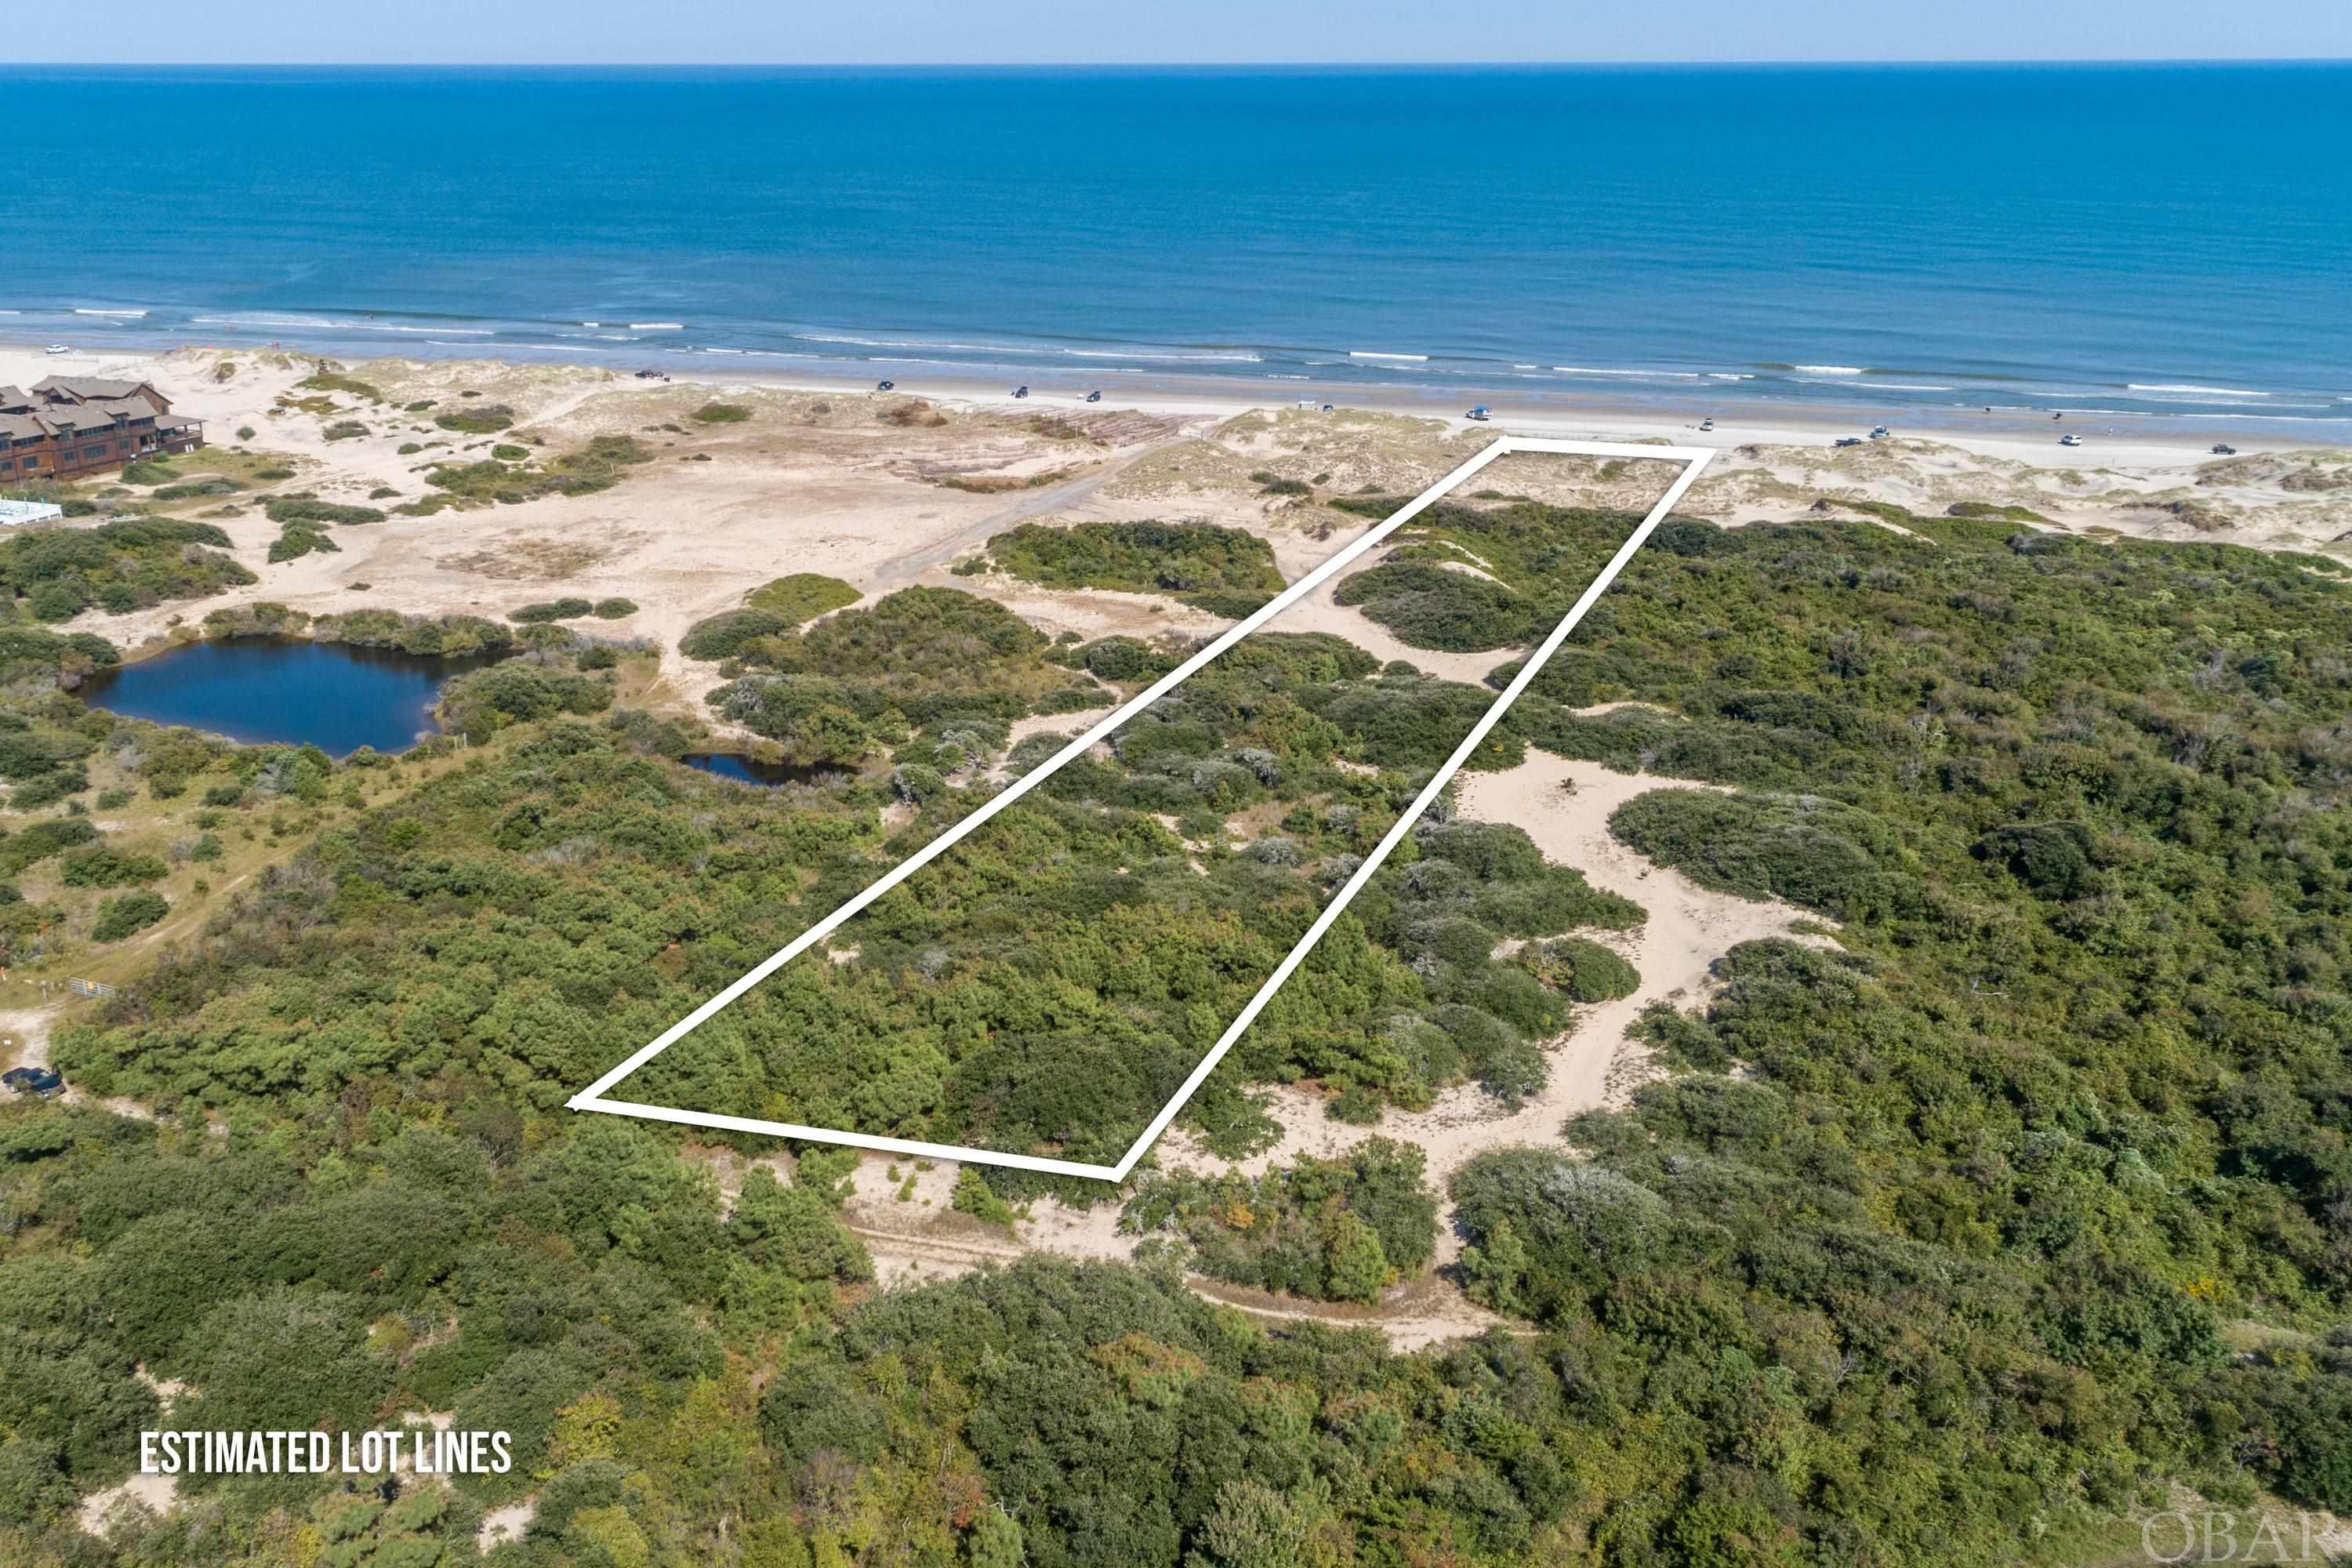 Ocean Front 2.98 Acre Lot with Elevation and Amazing Ocean Views !!   There are only a few Ocean Front lots left in North Swan Beach and this lot is one of the closest lots to the pavement. This beautiful almost 3 acre lot has 125 feet of beach/ocean frontage with it's own beach road access and is located in the 4 Wheel Drive Area of Corolla where the Wild Spanish Mustangs roam.  The perfect place to relax and enjoy the ocean and sound views, feel the ocean breeze and listen to the ocean sounds.   Here is a great opportunity to build your own beach home on an Ocean Front lot that offers a large area to build in the preferred Flood Zone X. Survey from 2020 on file. You can have it all - Beauty, Privacy, Acreage, OceanFront, Views, Flood Zone X and Proximity to the Pavement!  If you are looking for a beautiful large 2.98 acre Ocean Front Lot with Amazing Ocean Views and Sound Views that is located only about 1.7 miles from the pavement in Corolla, then this is the Ocean Front lot for you!